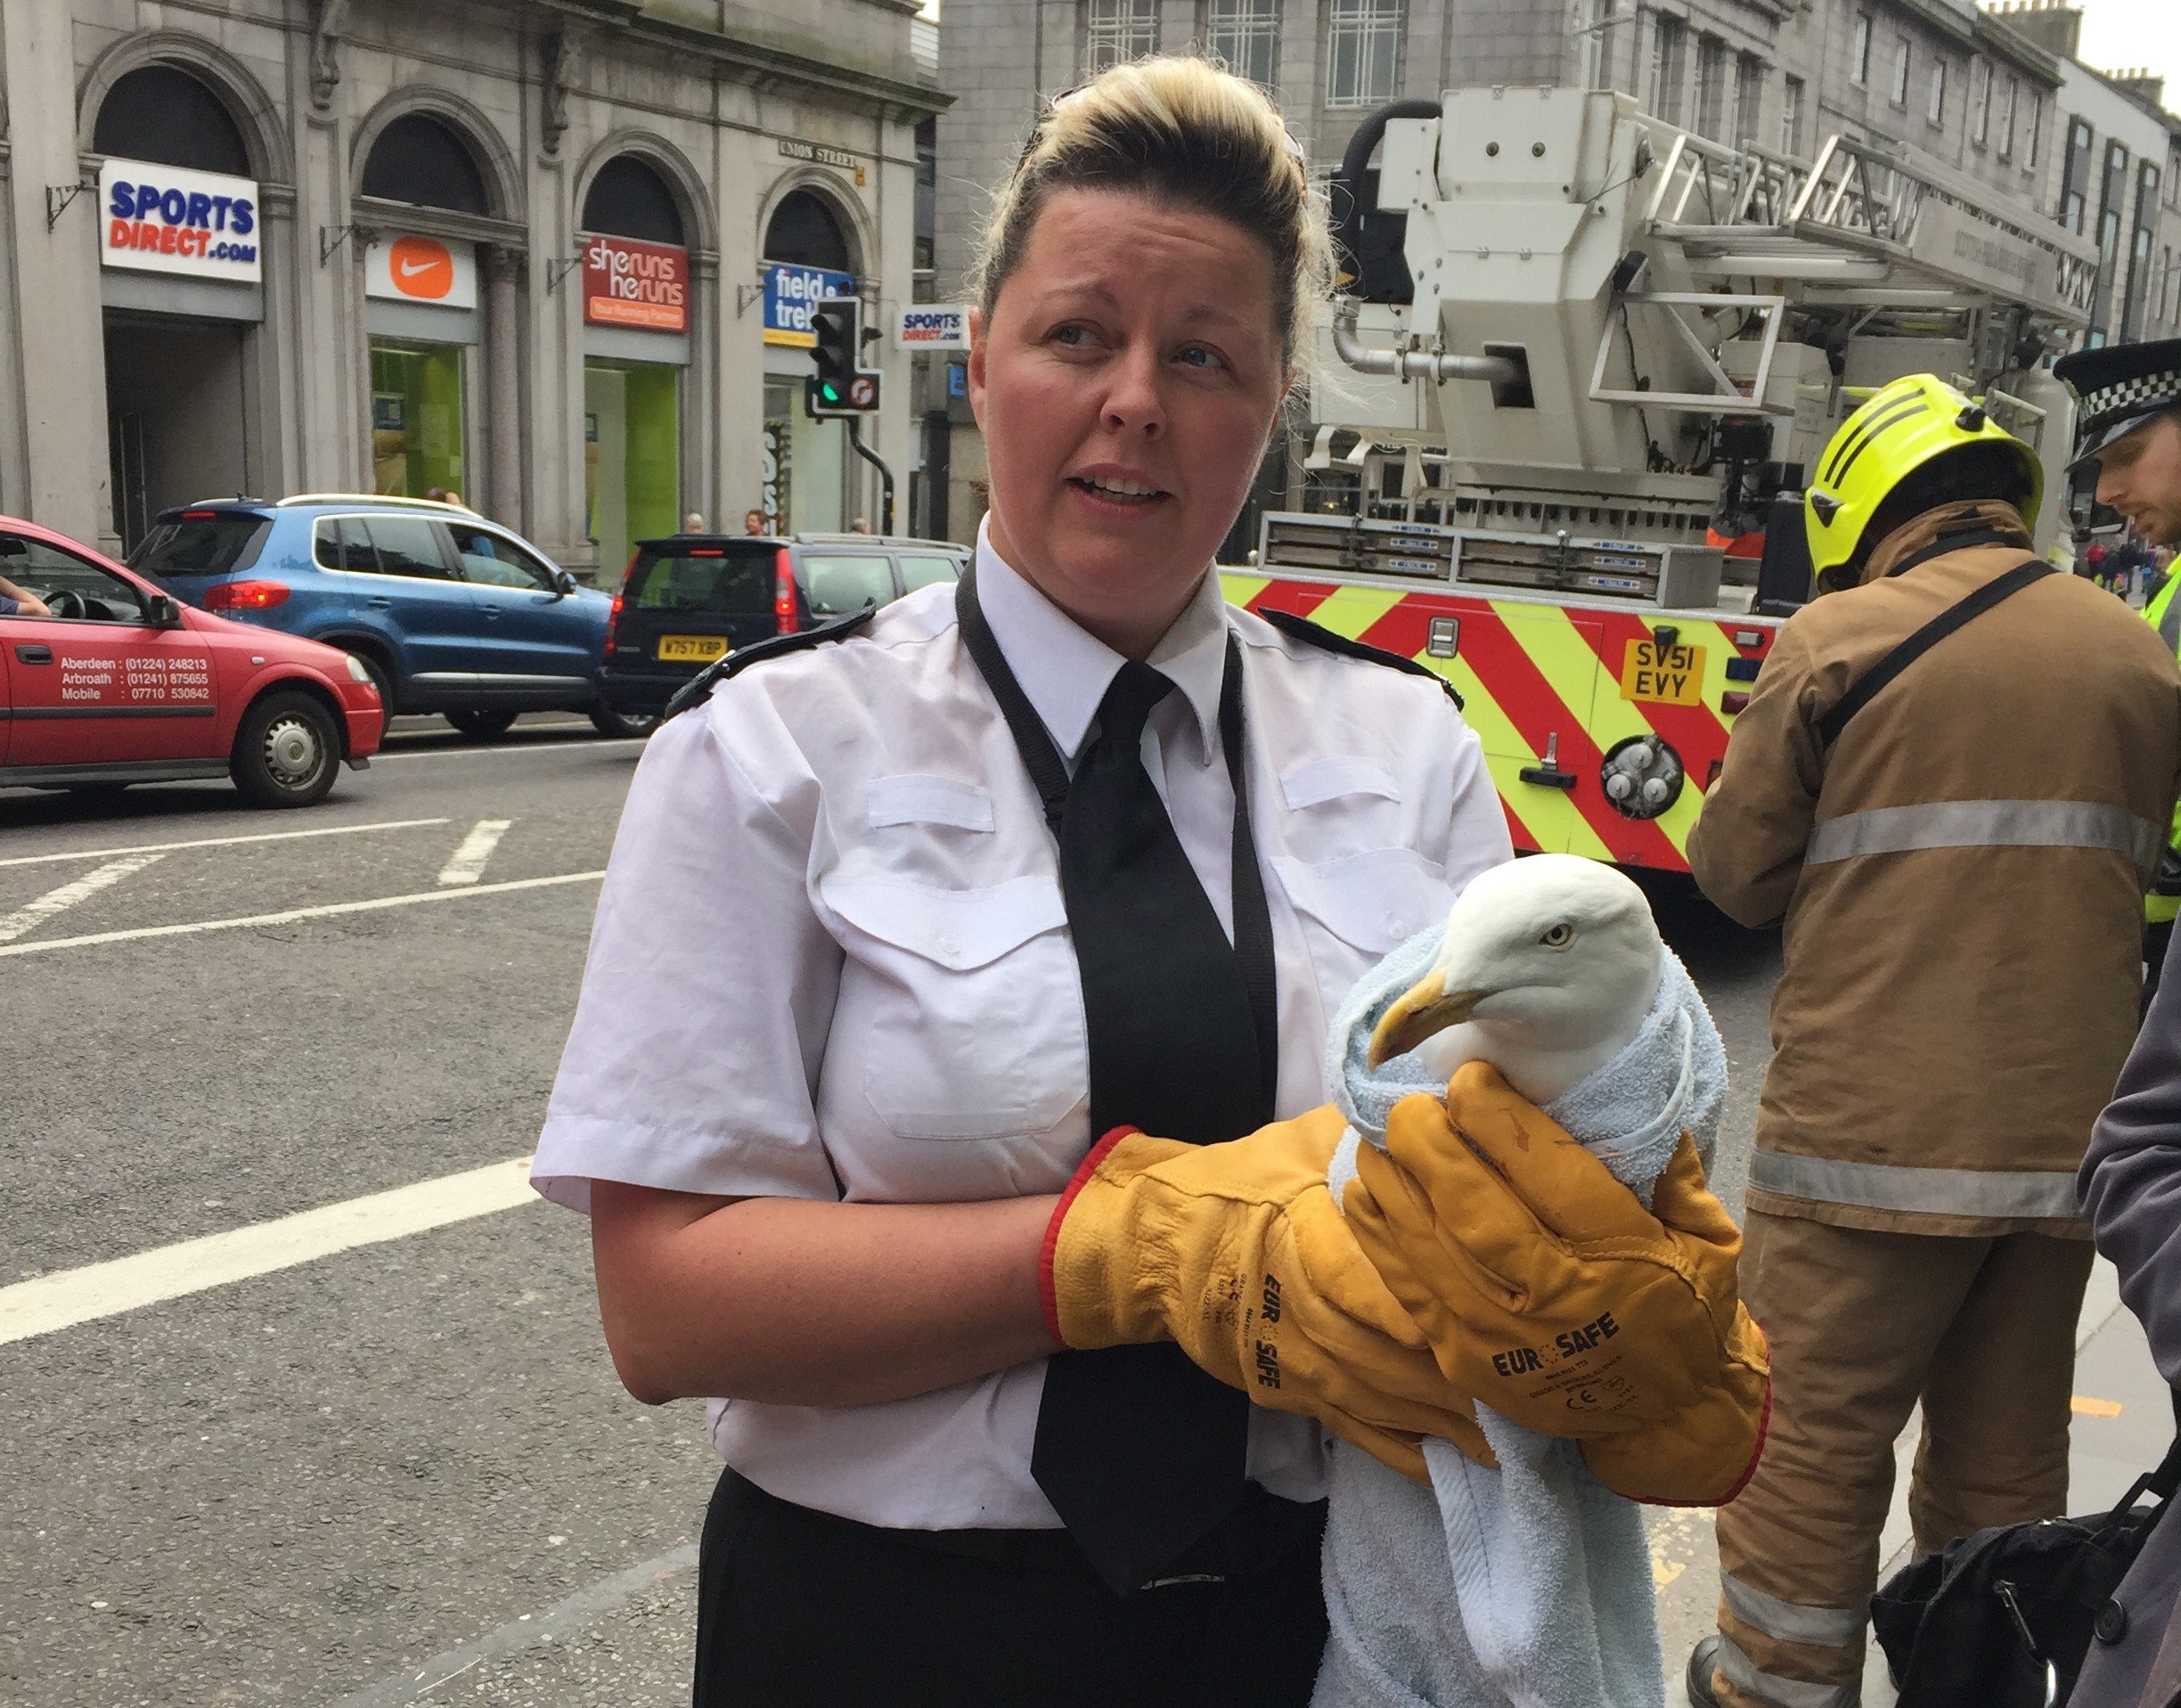 The gull was rescued from the building on Union Street